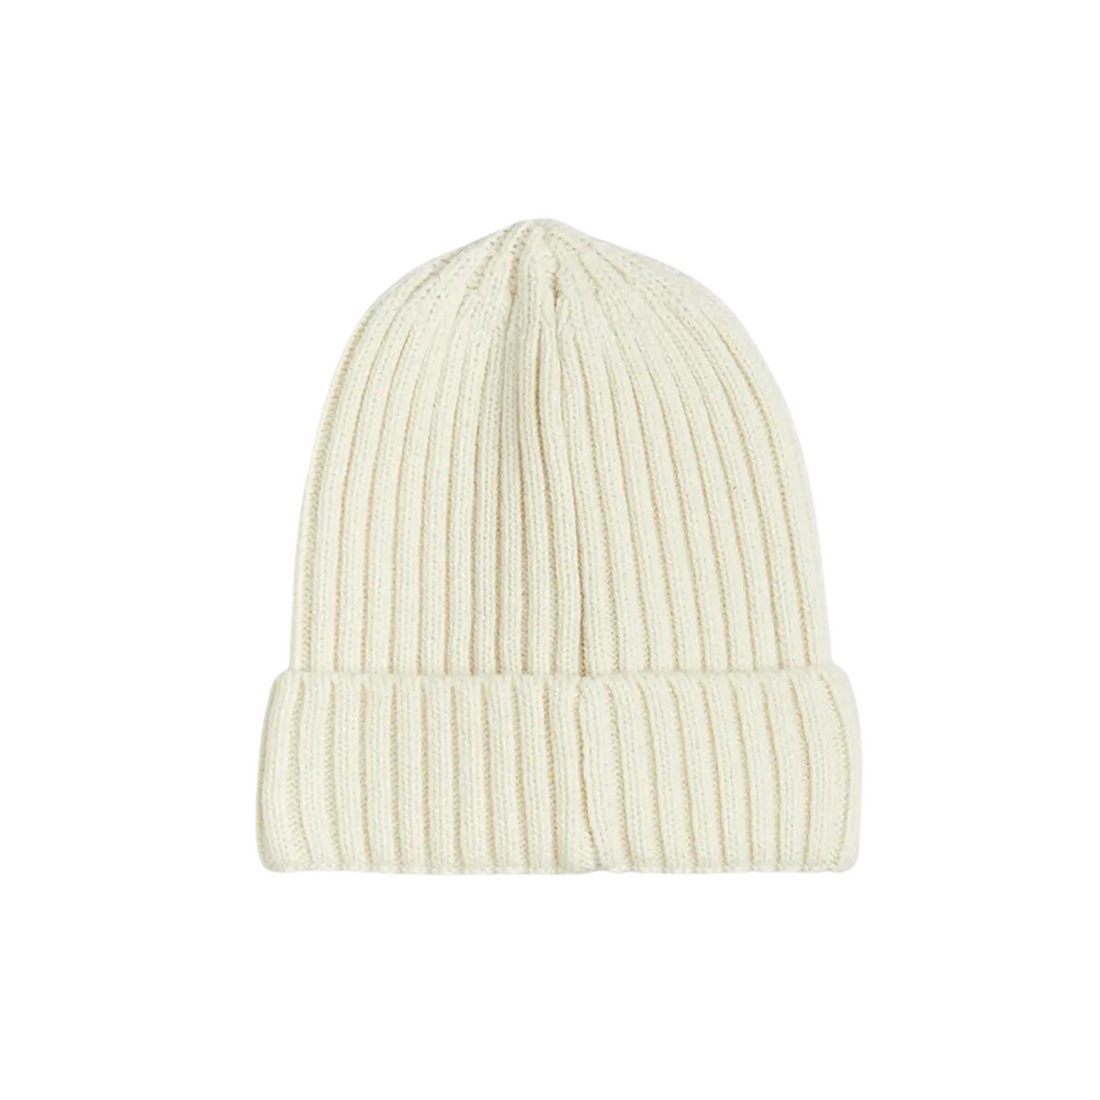 Wool Knitted hat - White